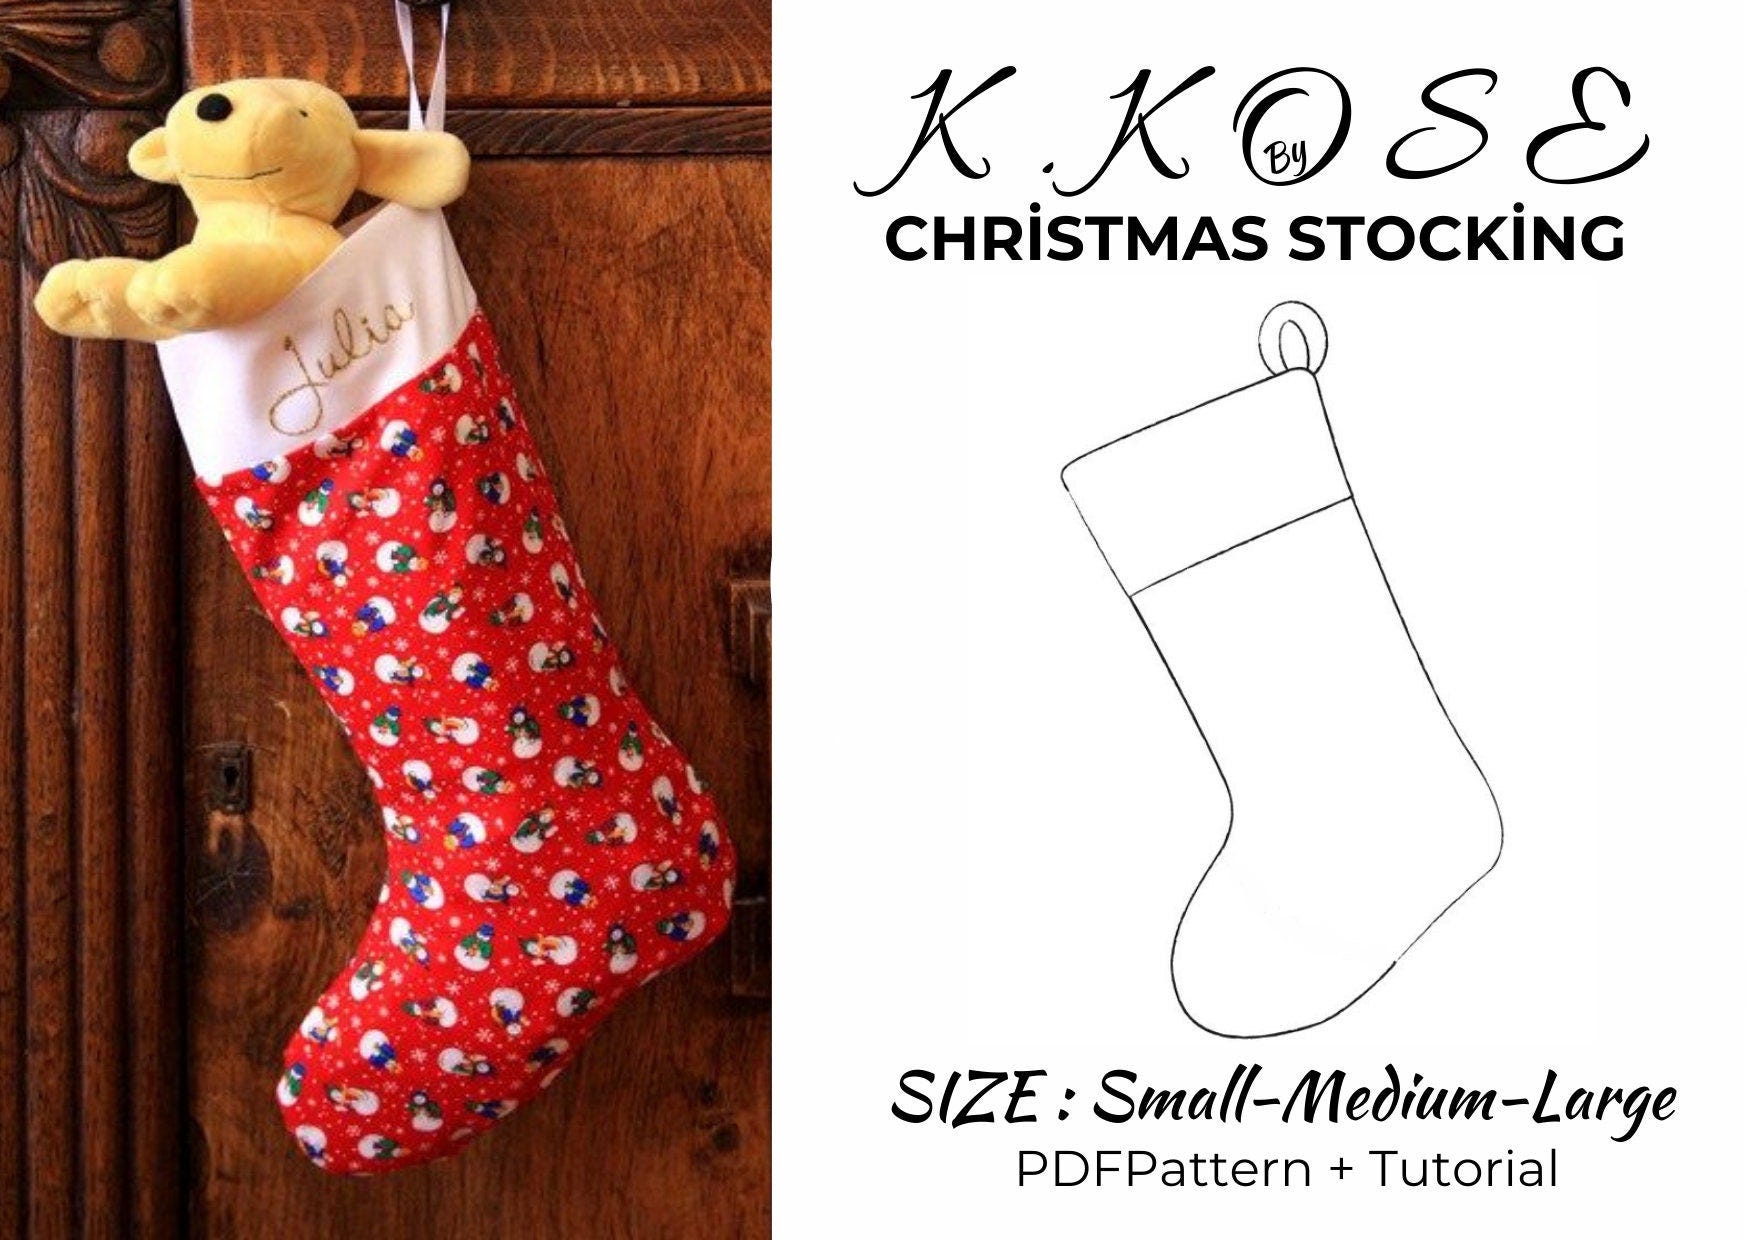 Learn to Sew Christmas Stocking/Sewing Pattern and Tutorial/Socks sewıng pattern/Easy Sewing Project for Beginner/Holiday/Christmas stocking